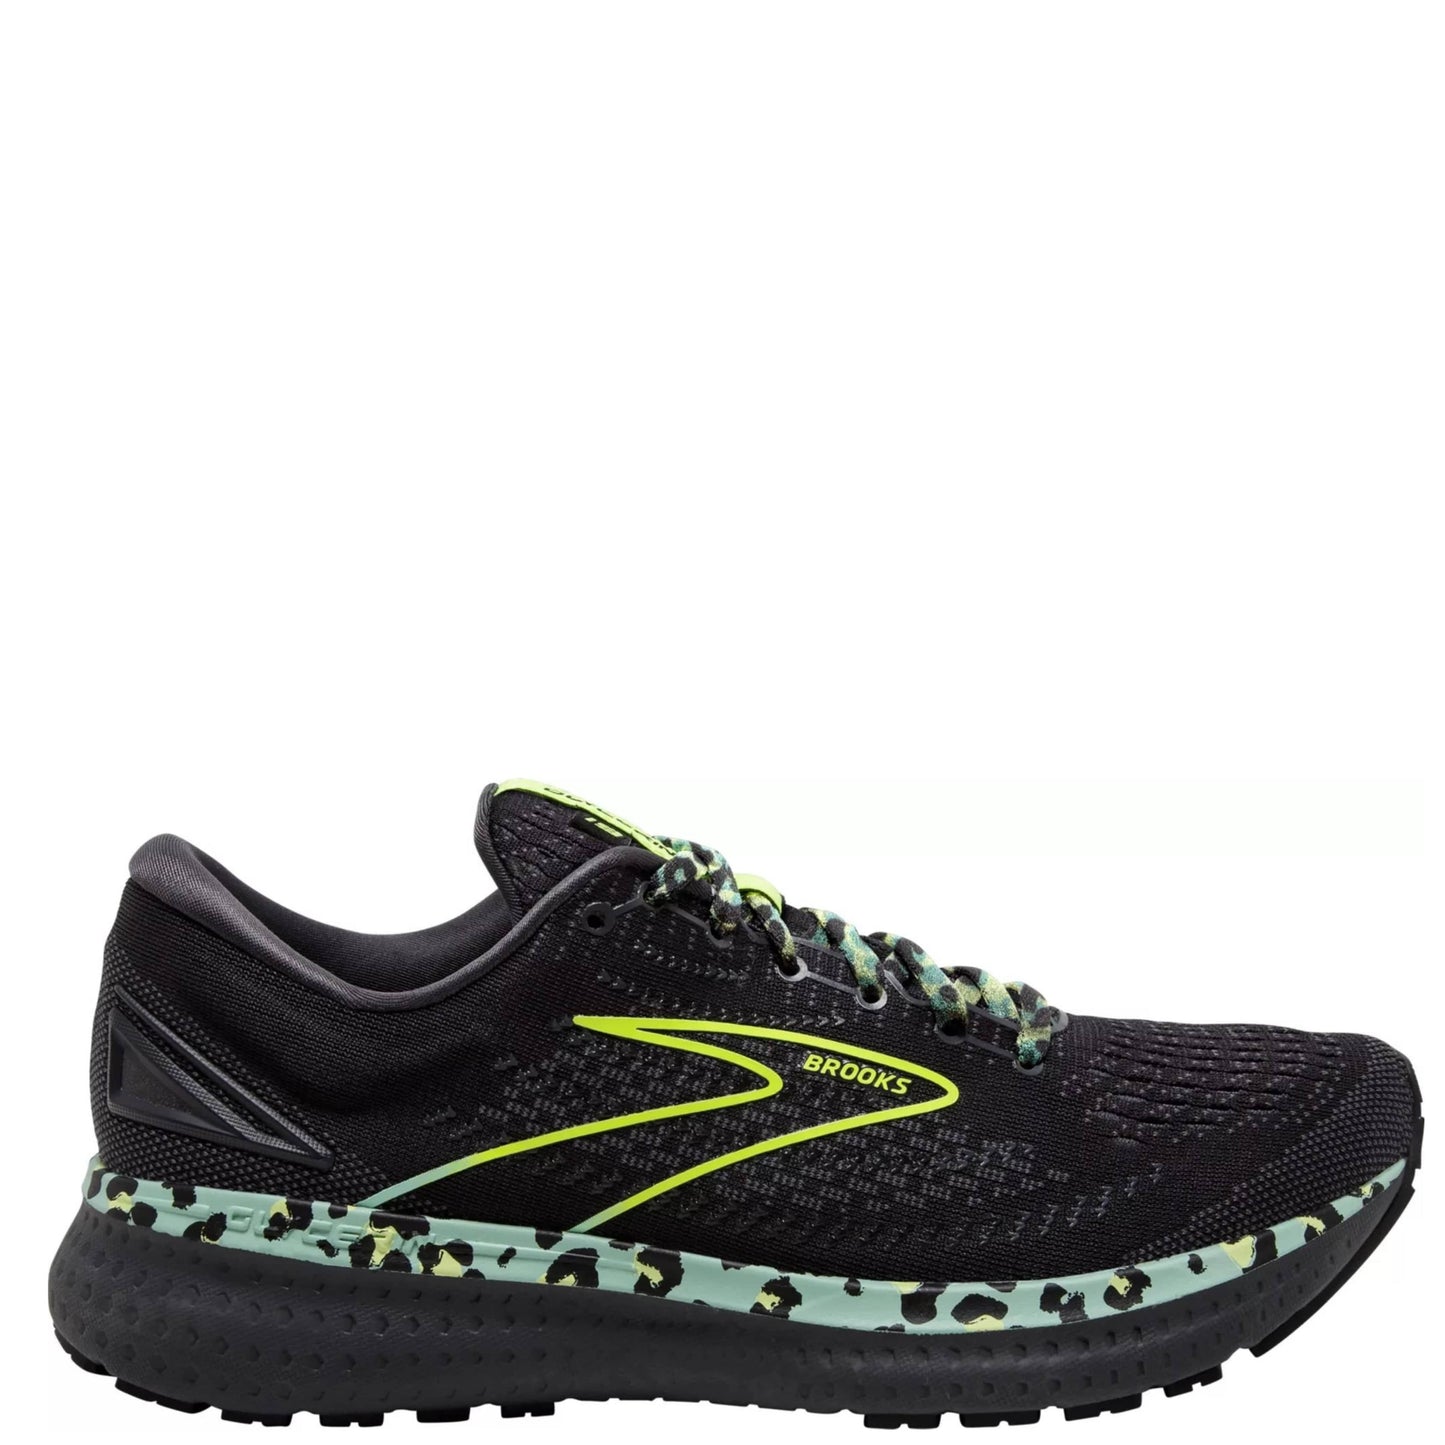 BROOKS Athletic Shoes 40 / Black BROOKS - Women's Glycerin 19 Electric Cheetah Running Shoes